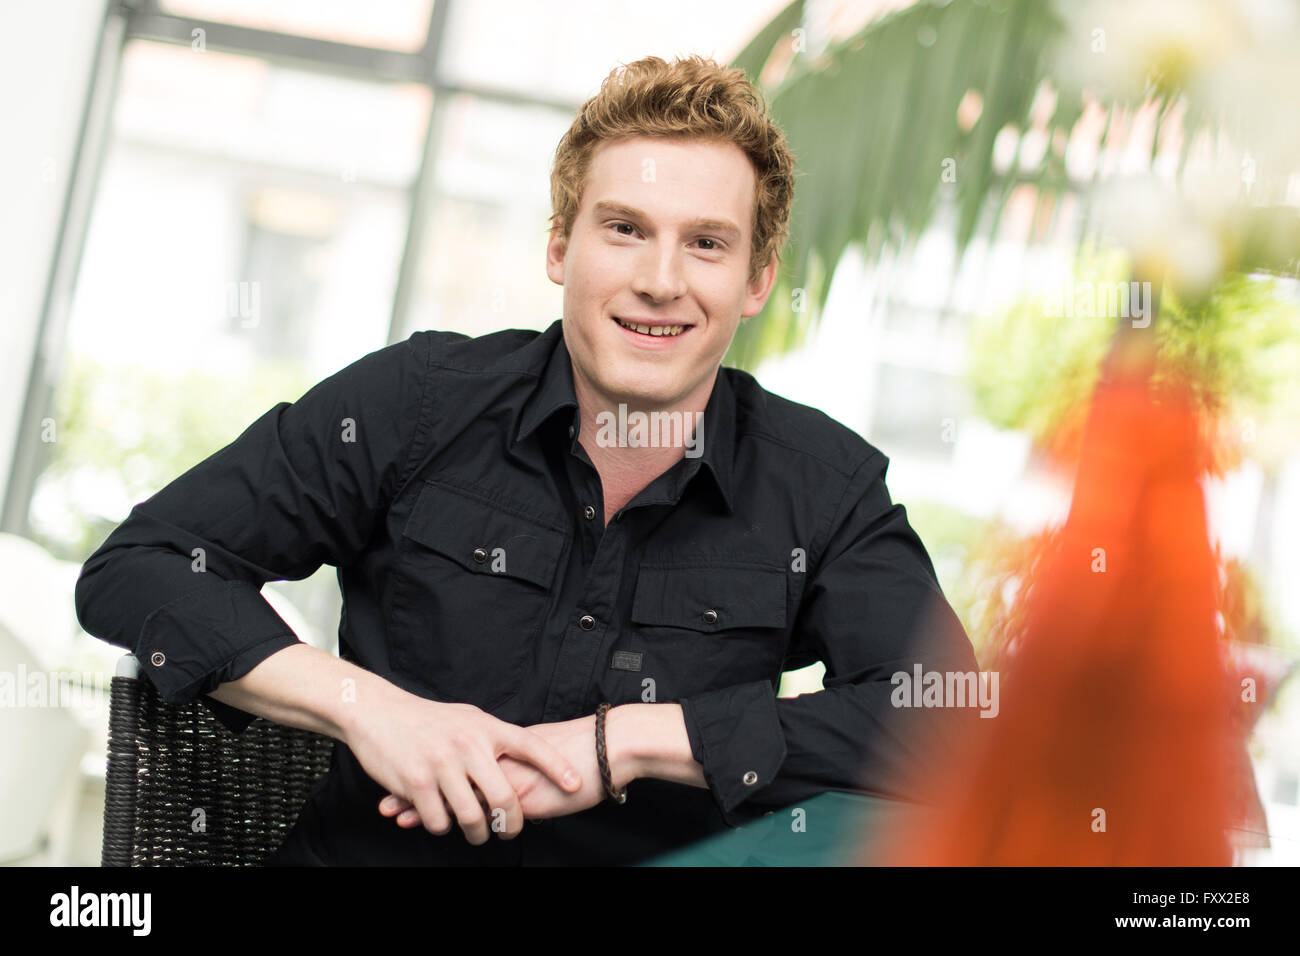 Hamburg, Germany. 18th Apr, 2016. Felix Everding, in the role of Dennis Grabowski, posing during a photo call in Hamburg, Germany, 18 April 2016. The ARD television series 'Rote Rosen' ('Red Roses') starts into the 13th season with 200 new episodes. Photo: Lukas Schulze/dpa/Alamy Live News Stock Photo